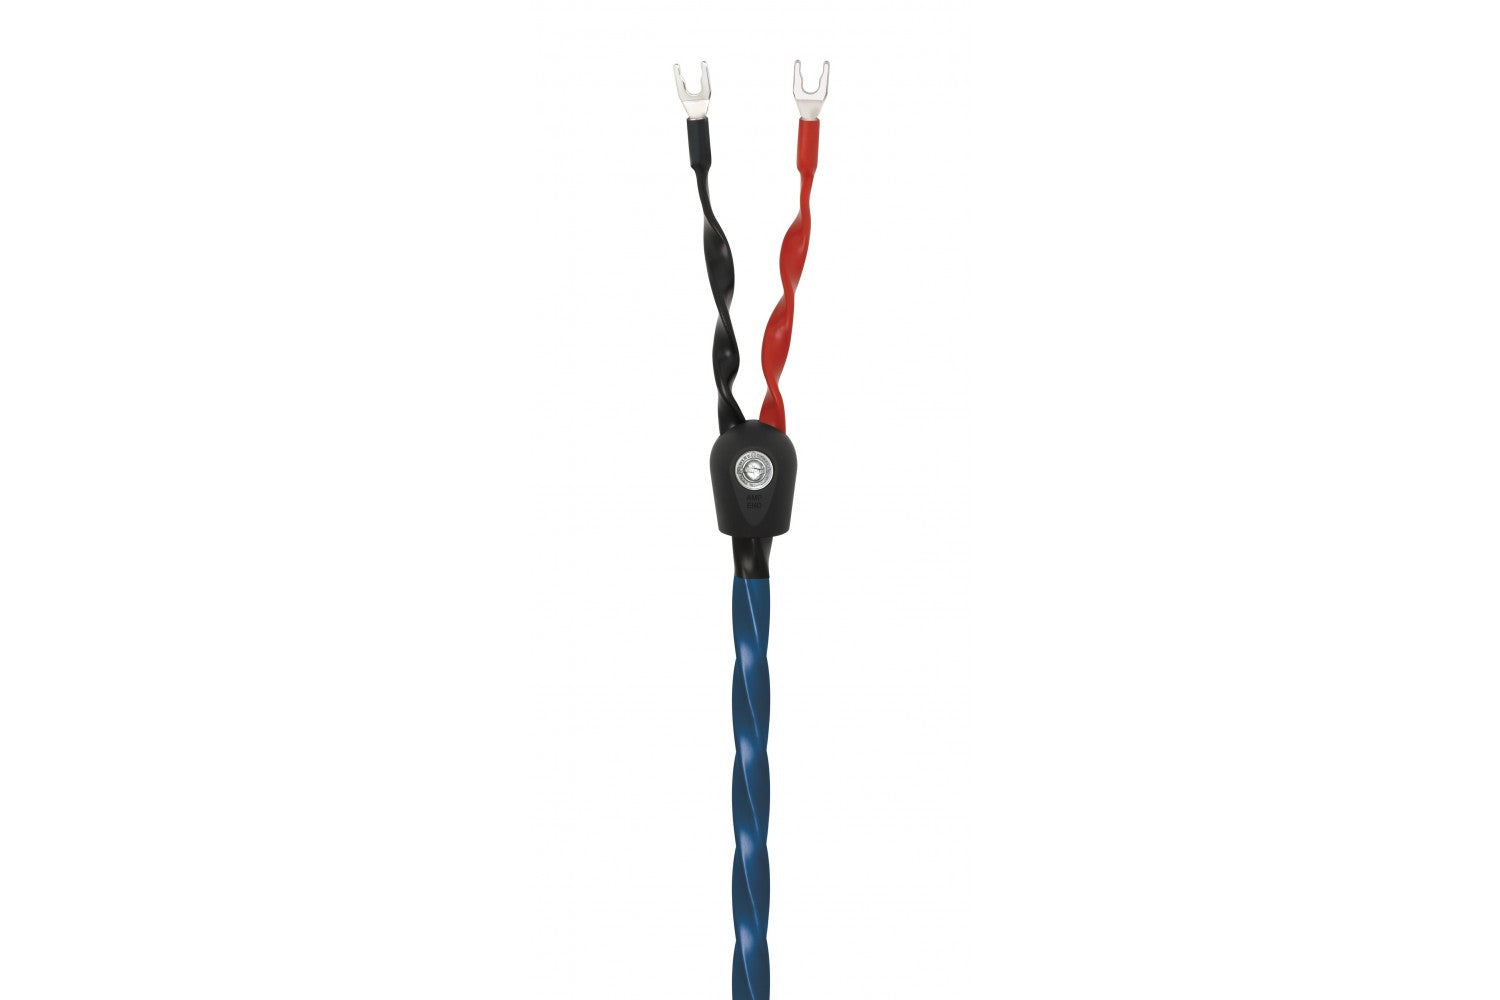 Wireworld OASIS 8 Speaker Cable is available at Vinyl Sound. Best price on Wireworld Speaker Cables - Wireworld's audio speaker cables - Wireworld Digital Audio Cables - balanced and coaxial audio cables - Patented Wireworld audio interconnect cables - Wireworld power cables...